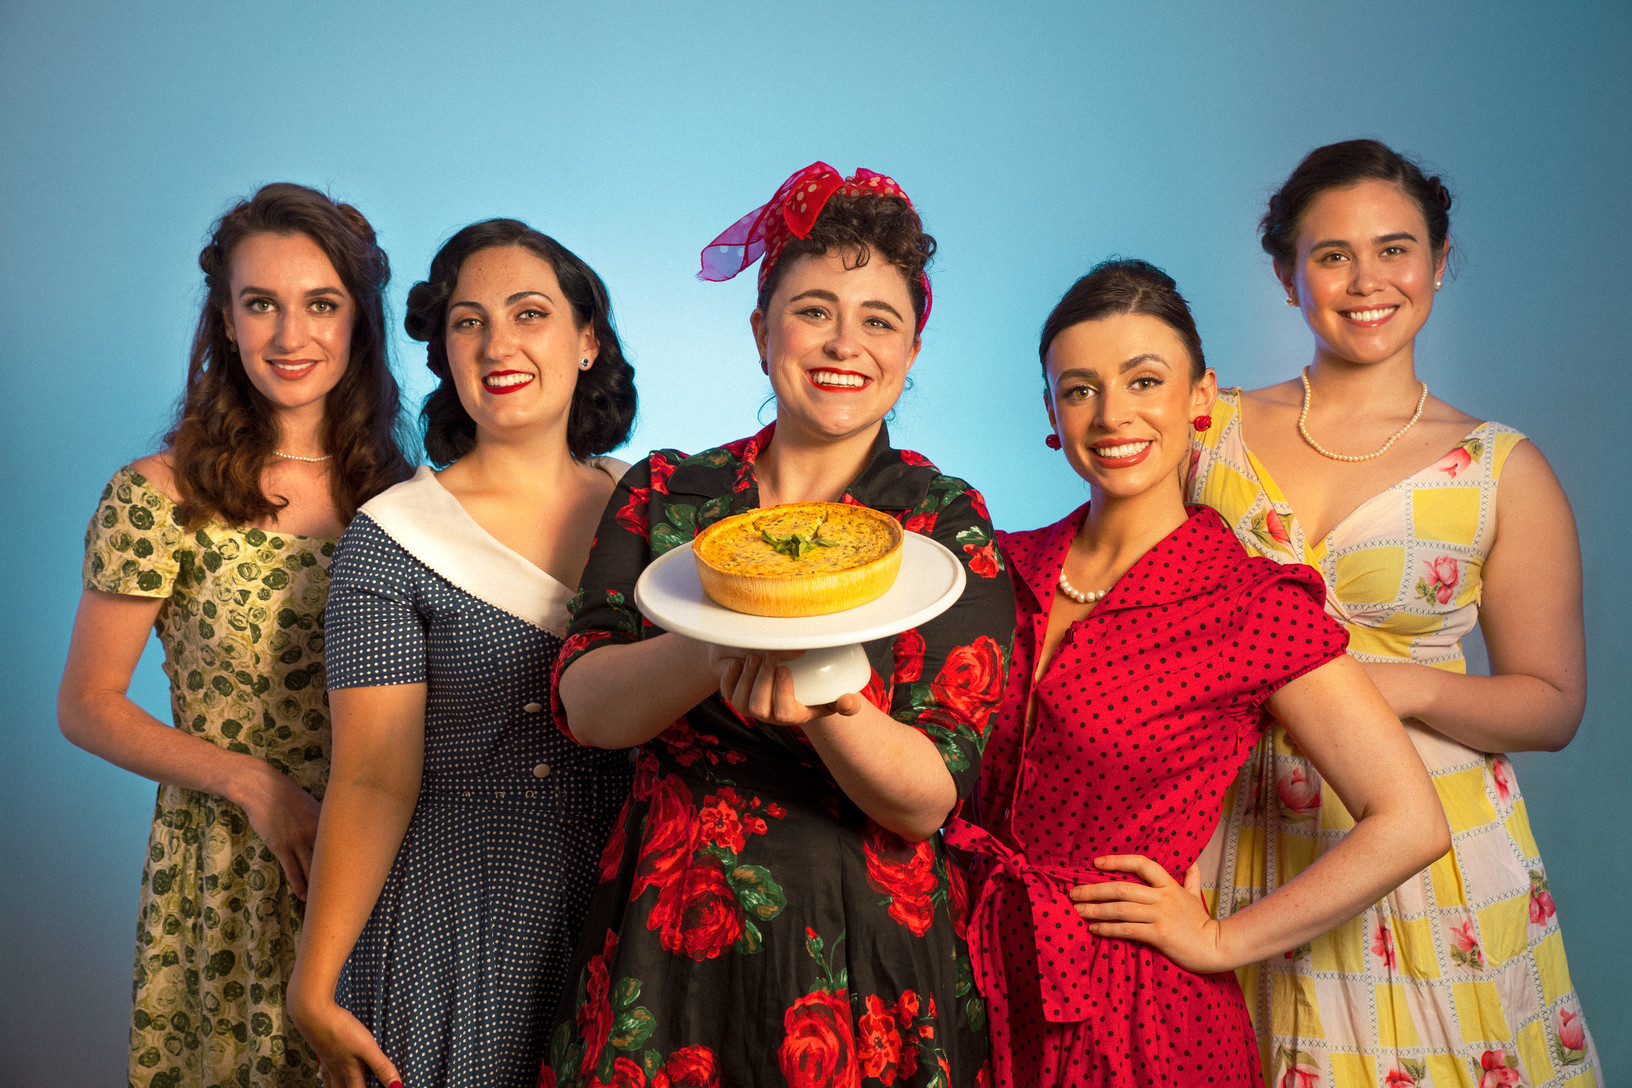 What’s On: 5 Lesbians Eating a Quiche